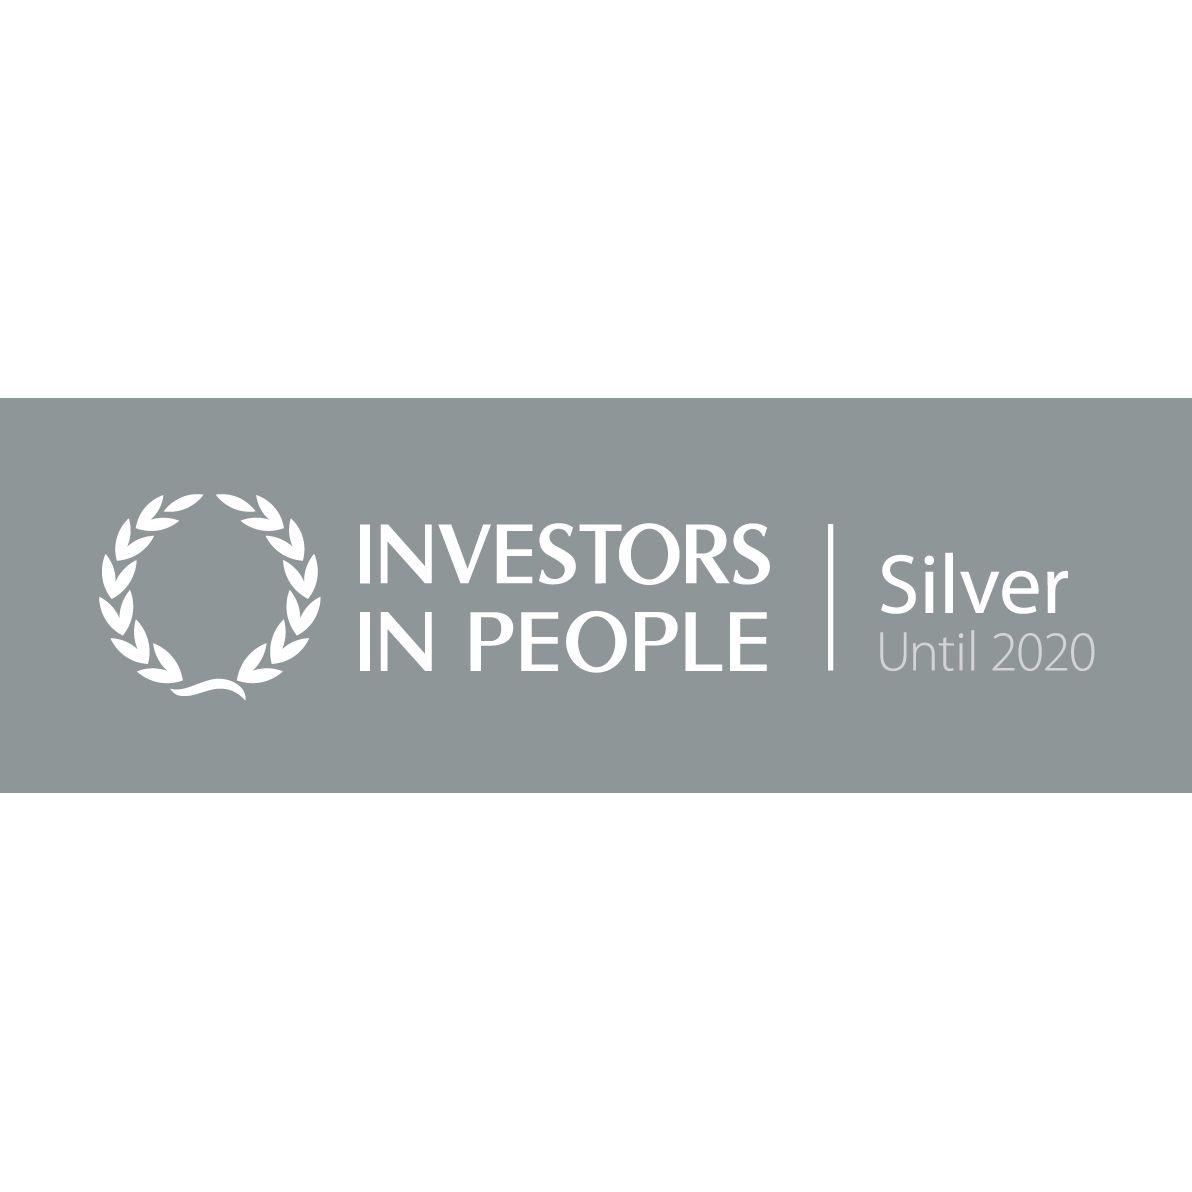 Gold Black and White Construction Logo - McLaren achieve Silver Award for Investors in People - McLaren